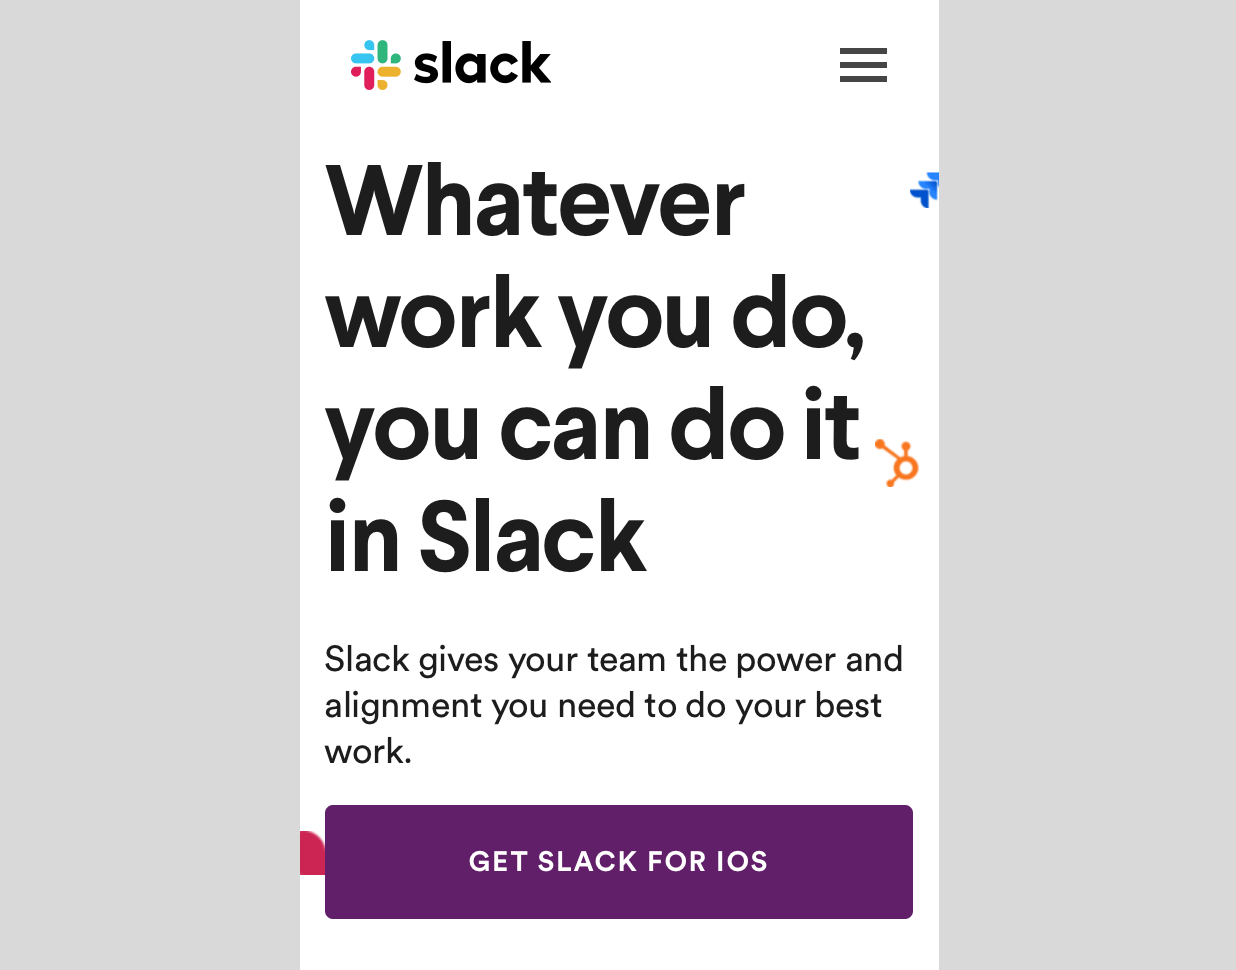 The Slack mobile call to action.